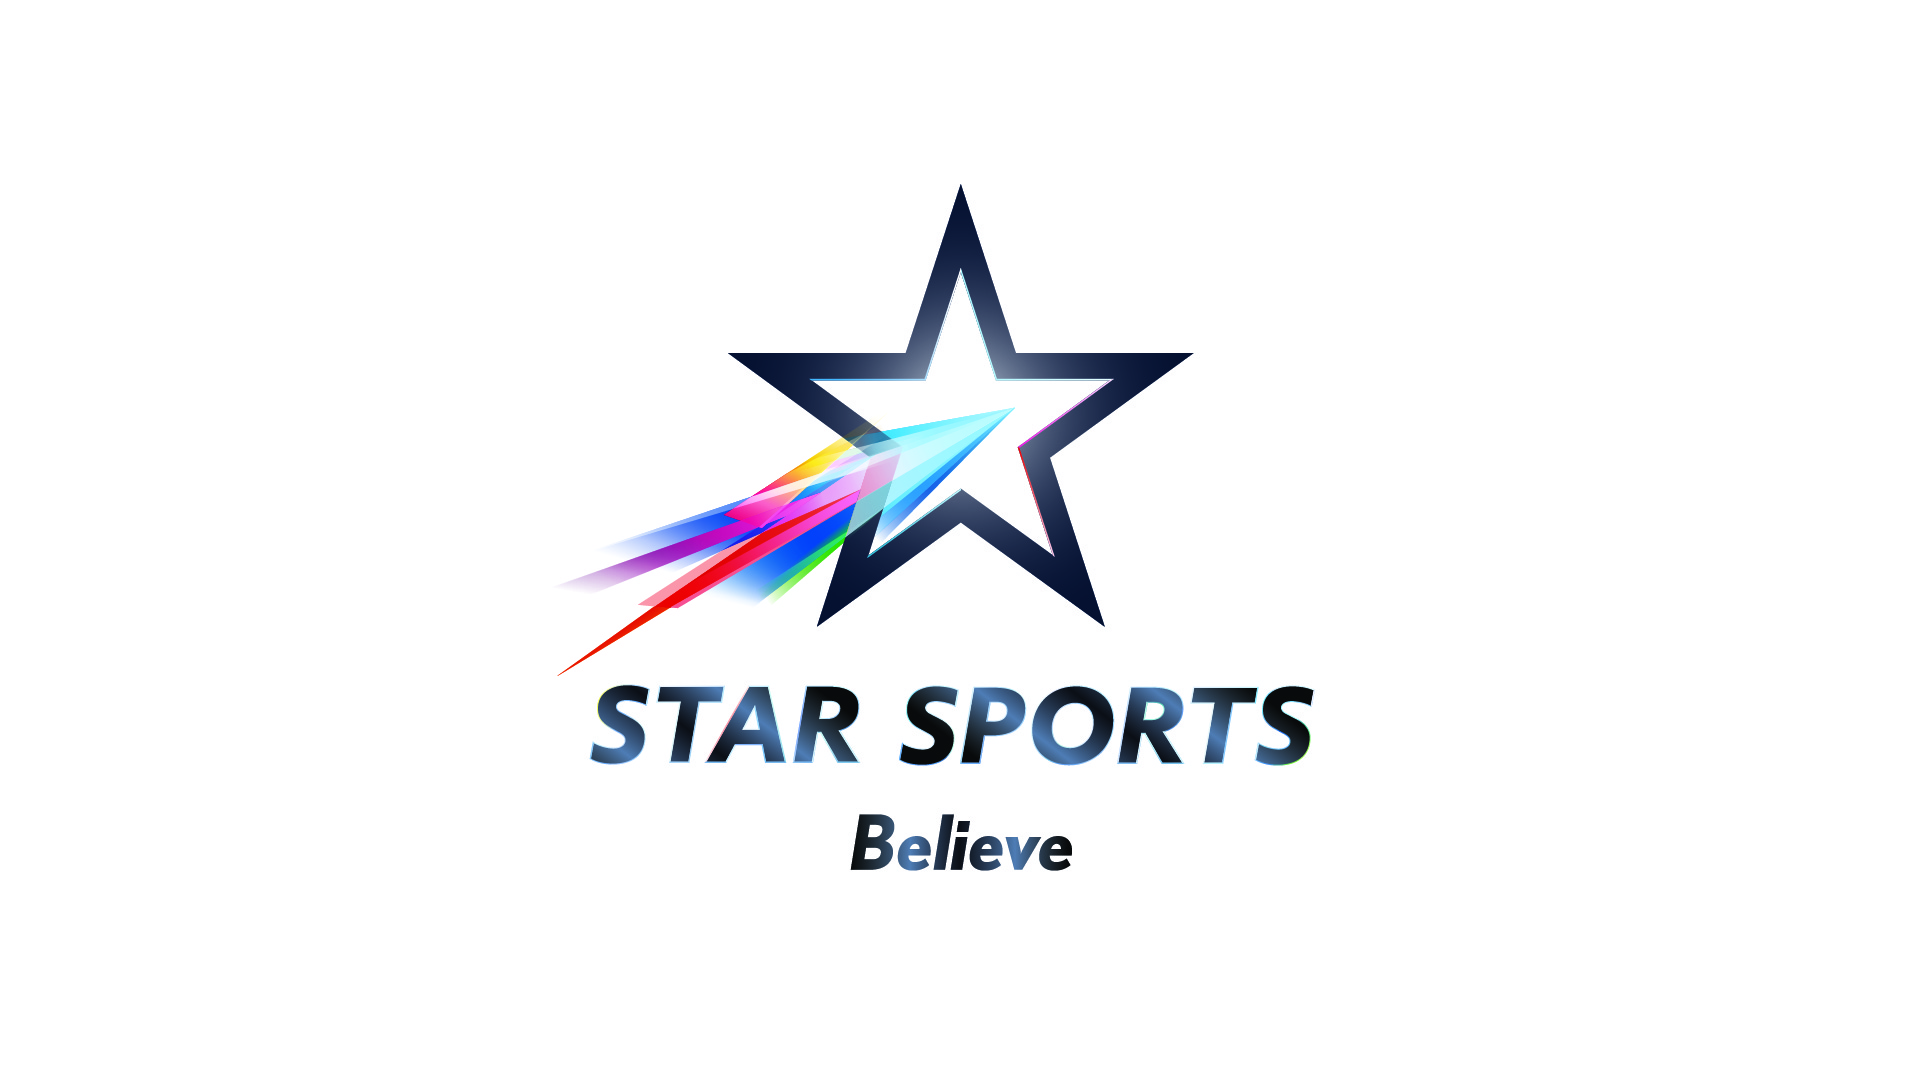 star-sports-garners-28-viewership-growth-for-the-first-24-matches-of-the-pro-kabaddi-league